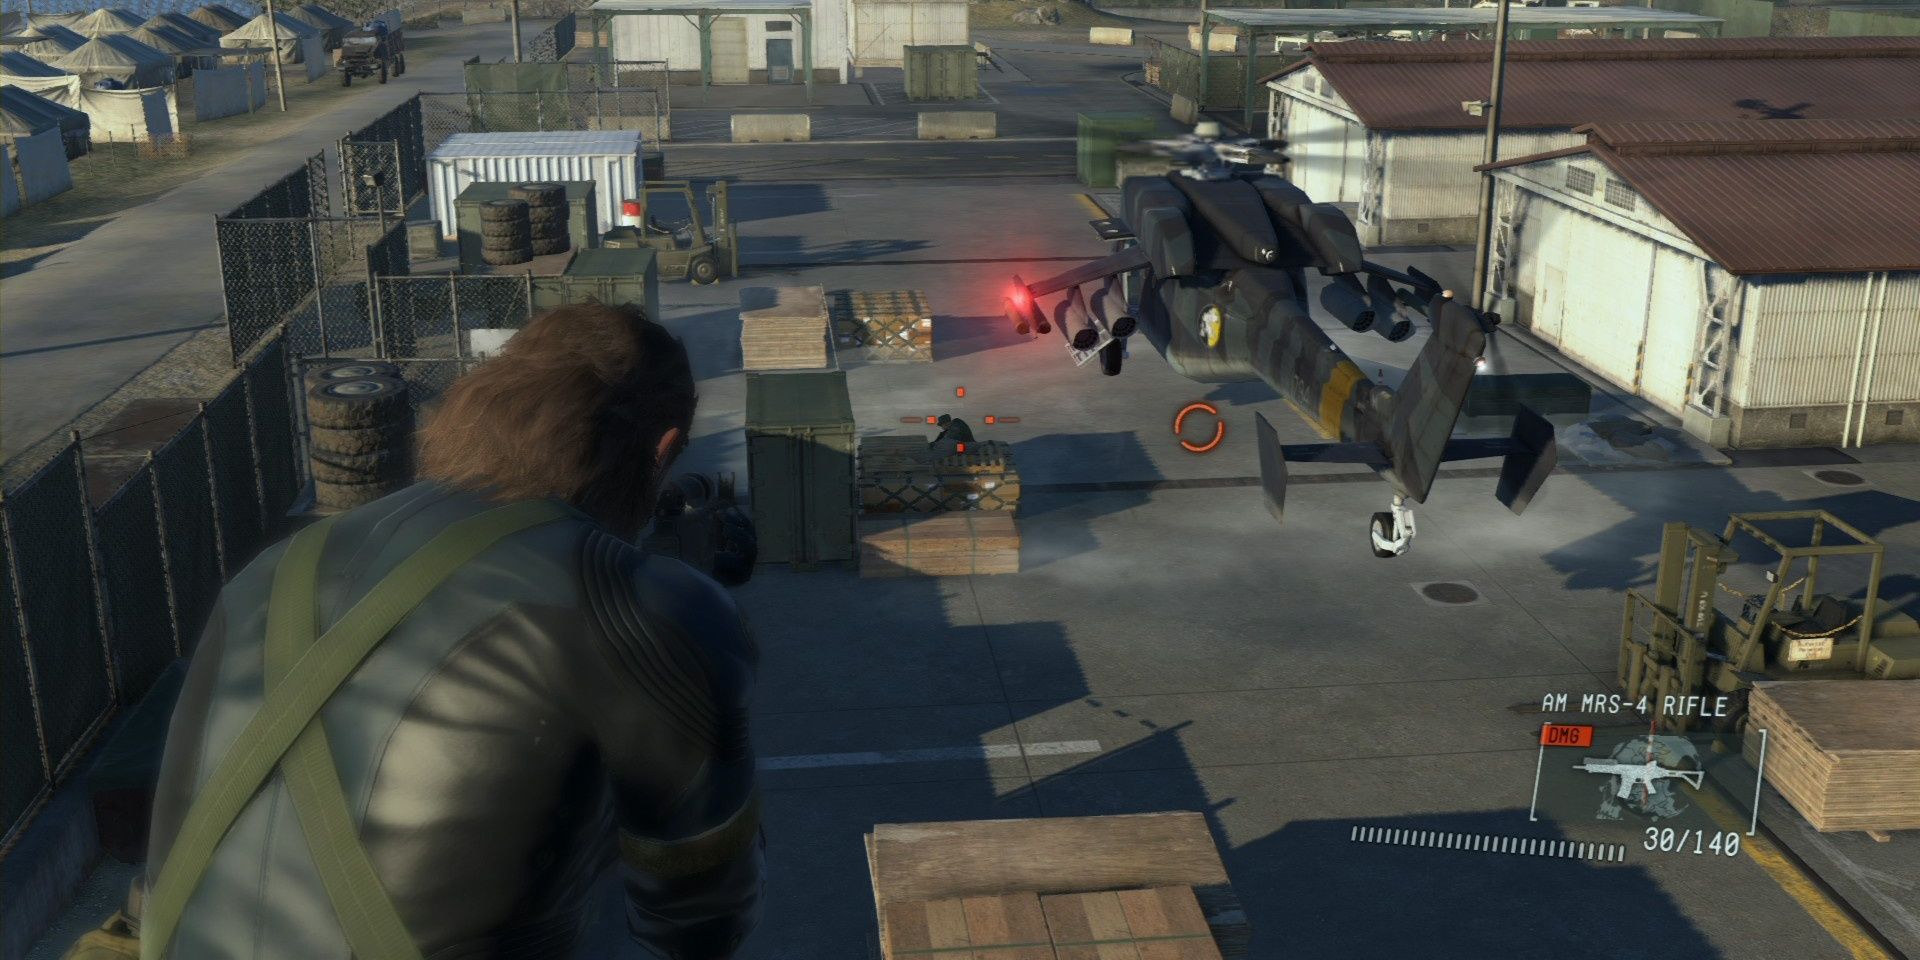 Snake aiming at a helicopter in a military camp in Metal Gear Solid V